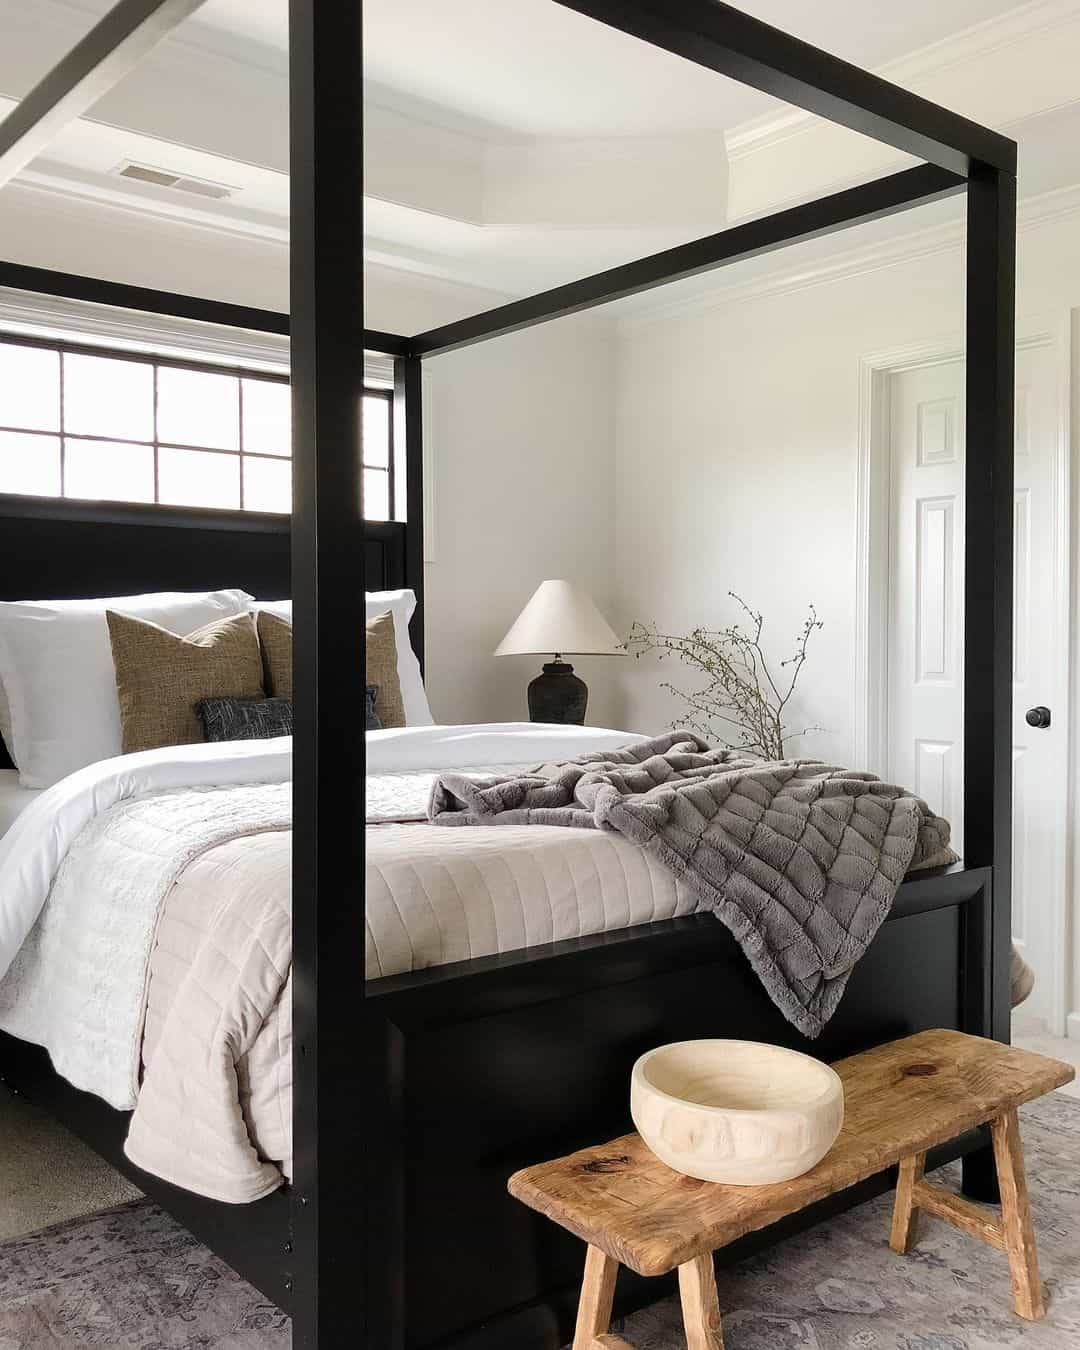 Check Out These Magnificent Bedrooms with a Queen Canopy Bed